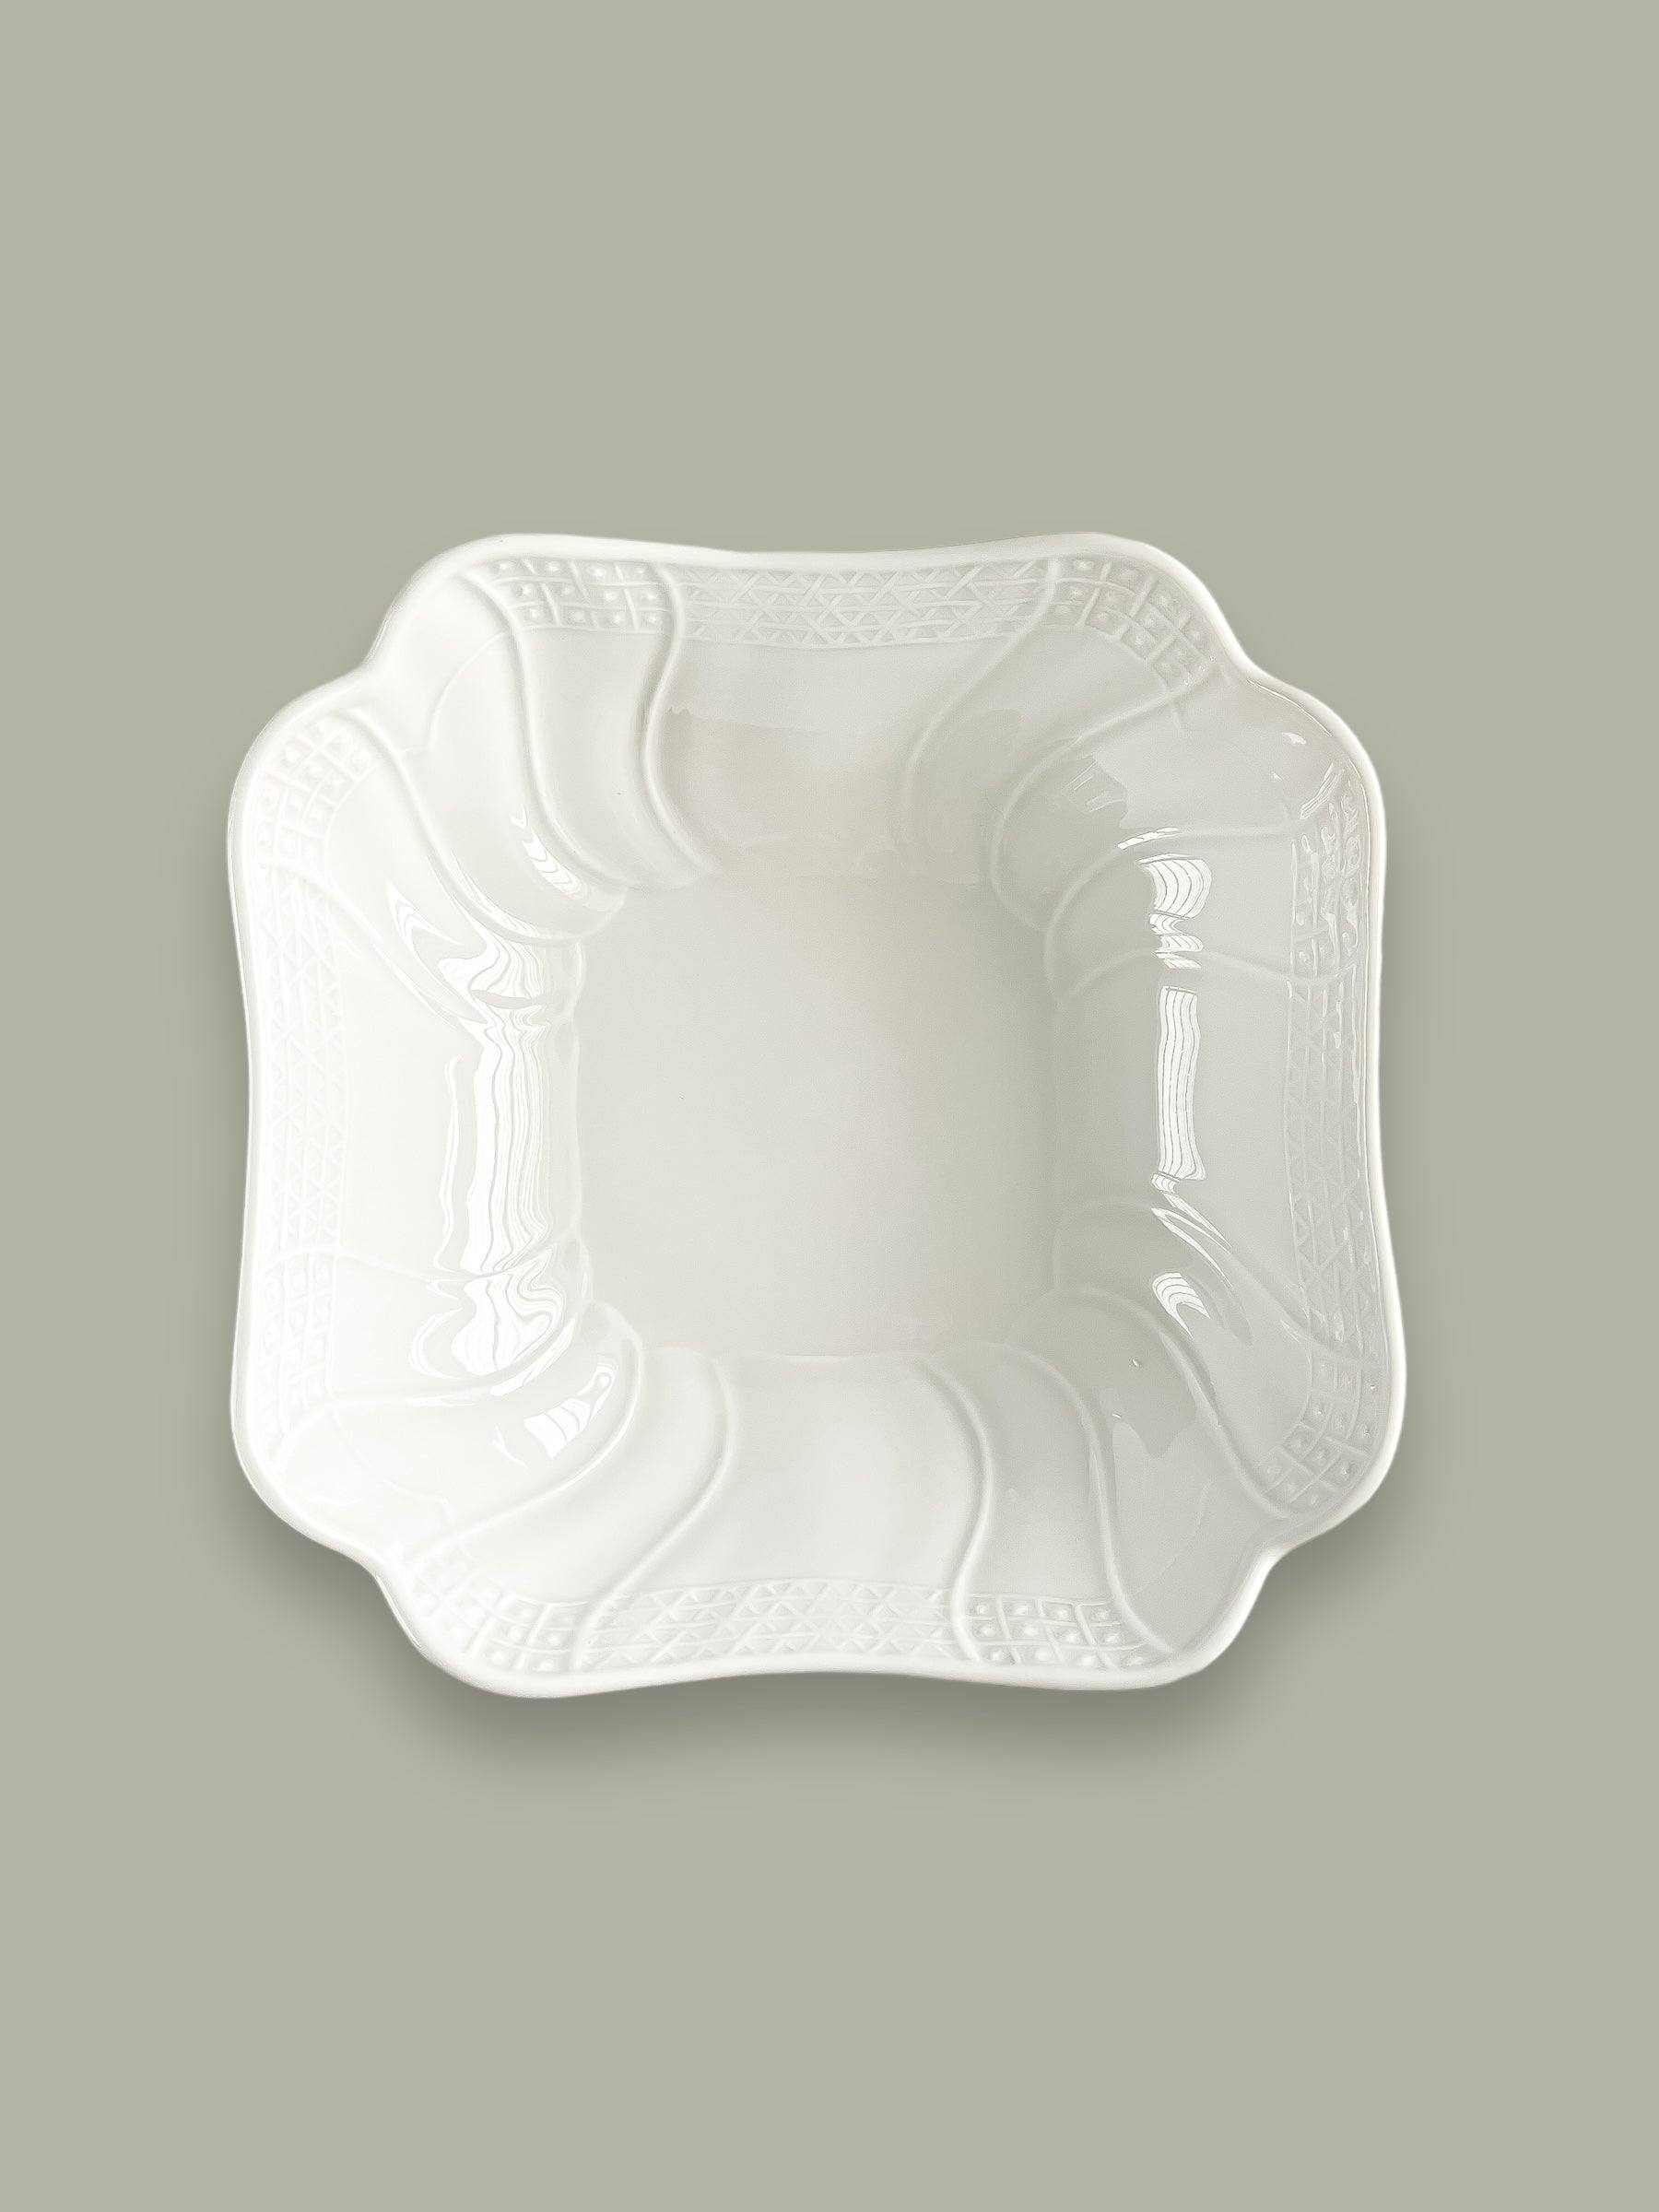 Hutschenreuther 23cm Square Vegetable/Salad Bowl - 'Dresden' Collection in White - SOSC Home